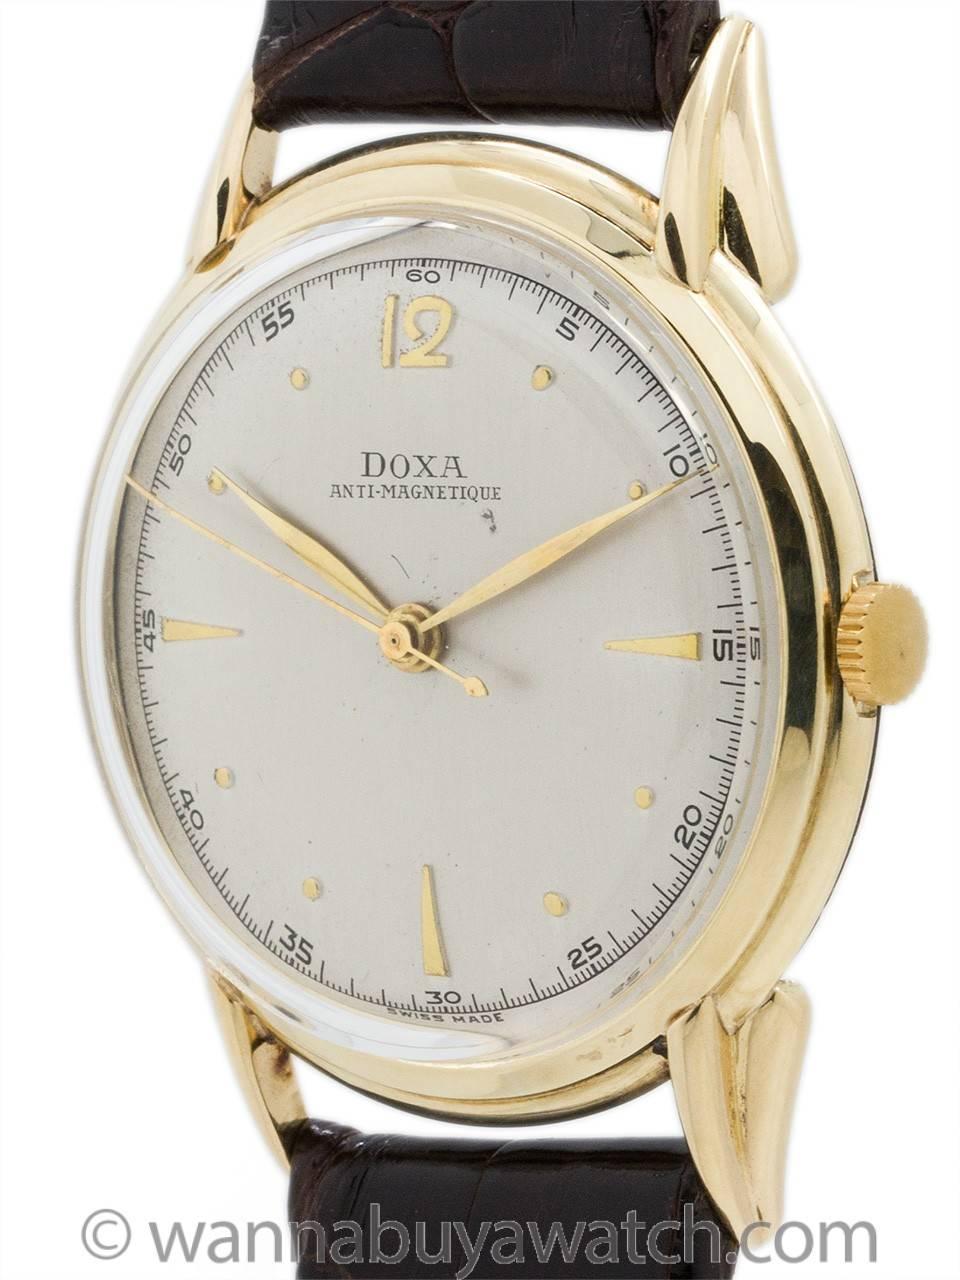 Vintage man’s Doxa dress watch circa 1950’s. Very nice looking, large for the era 36 X 42mm 4K gold case with wide stepped bezel, extended curved lugs. Case design resembles a Patek Philippe case, featuring acrylic crystal, and original matte